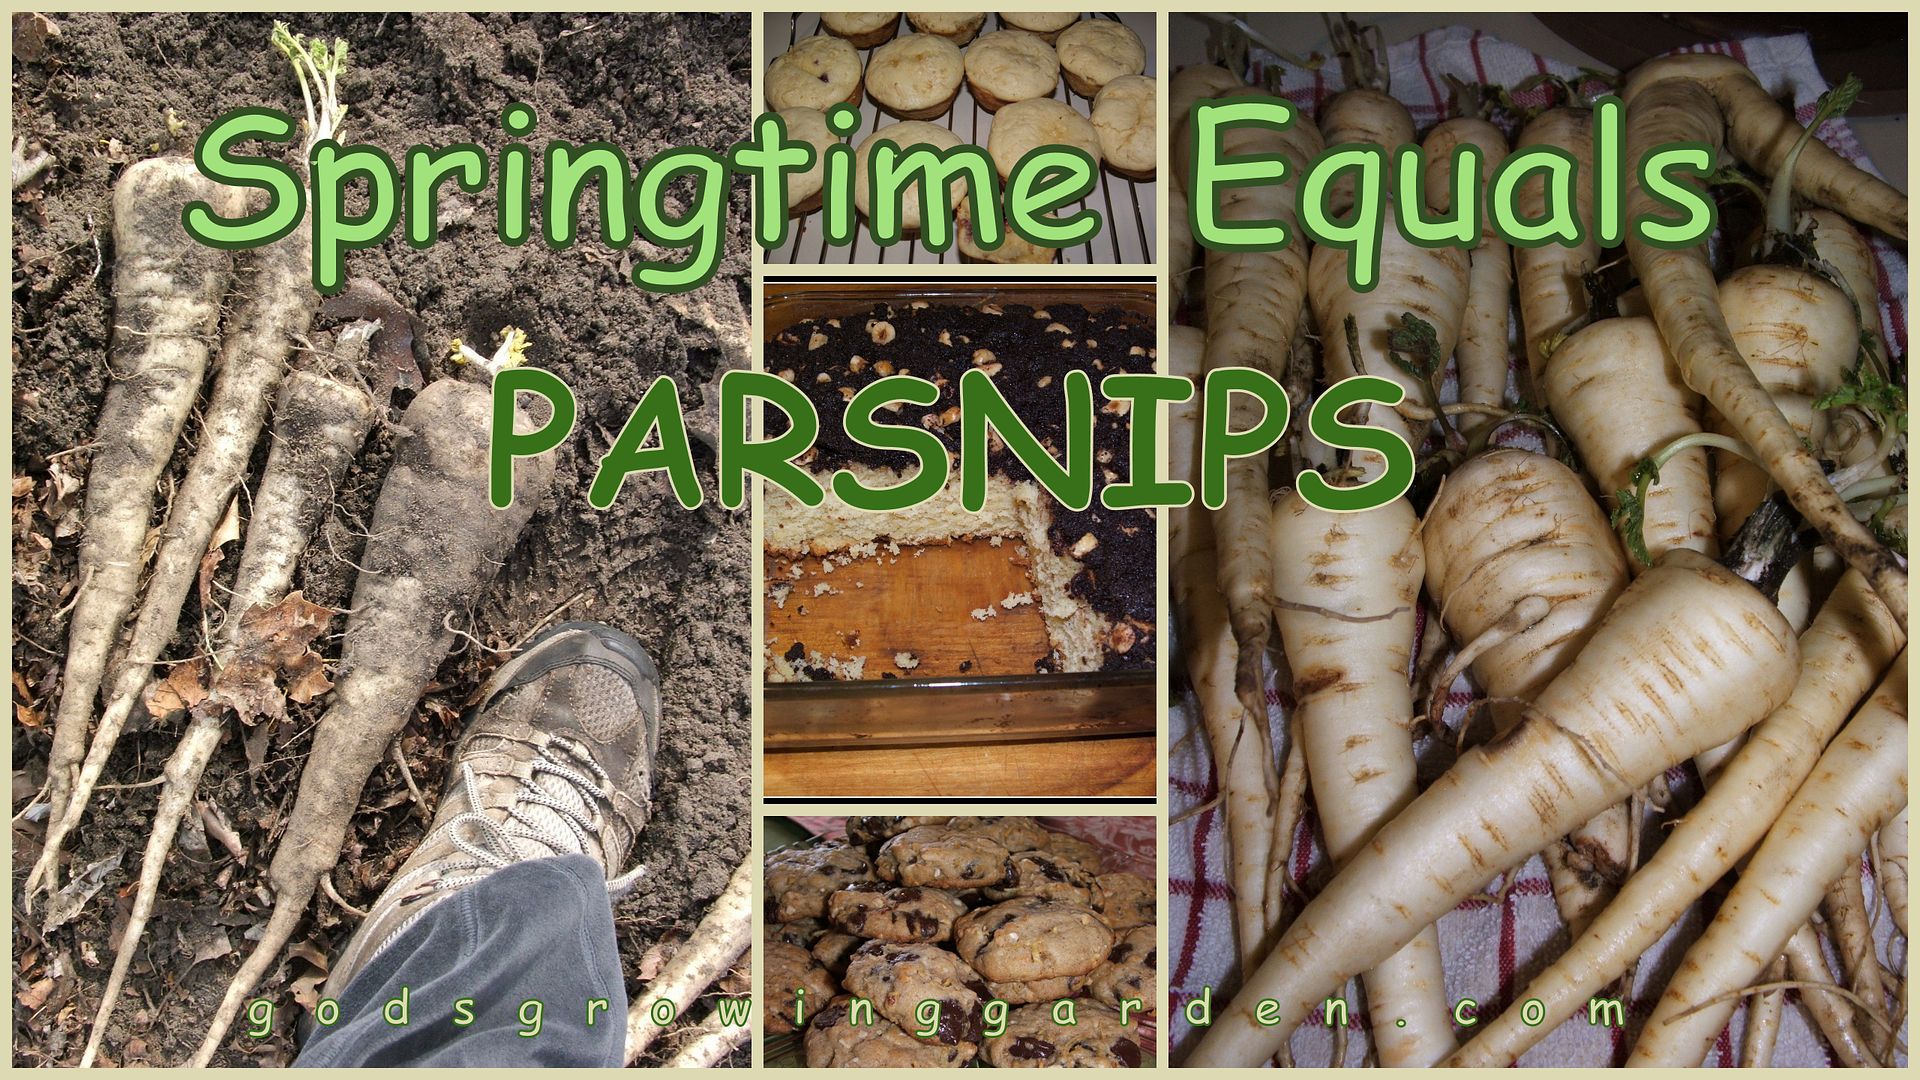 Parsnips by Angie Ouellette-Tower for godsgrowinggarden.com photo 2013-03-31_zpsa9b2b83e.jpg